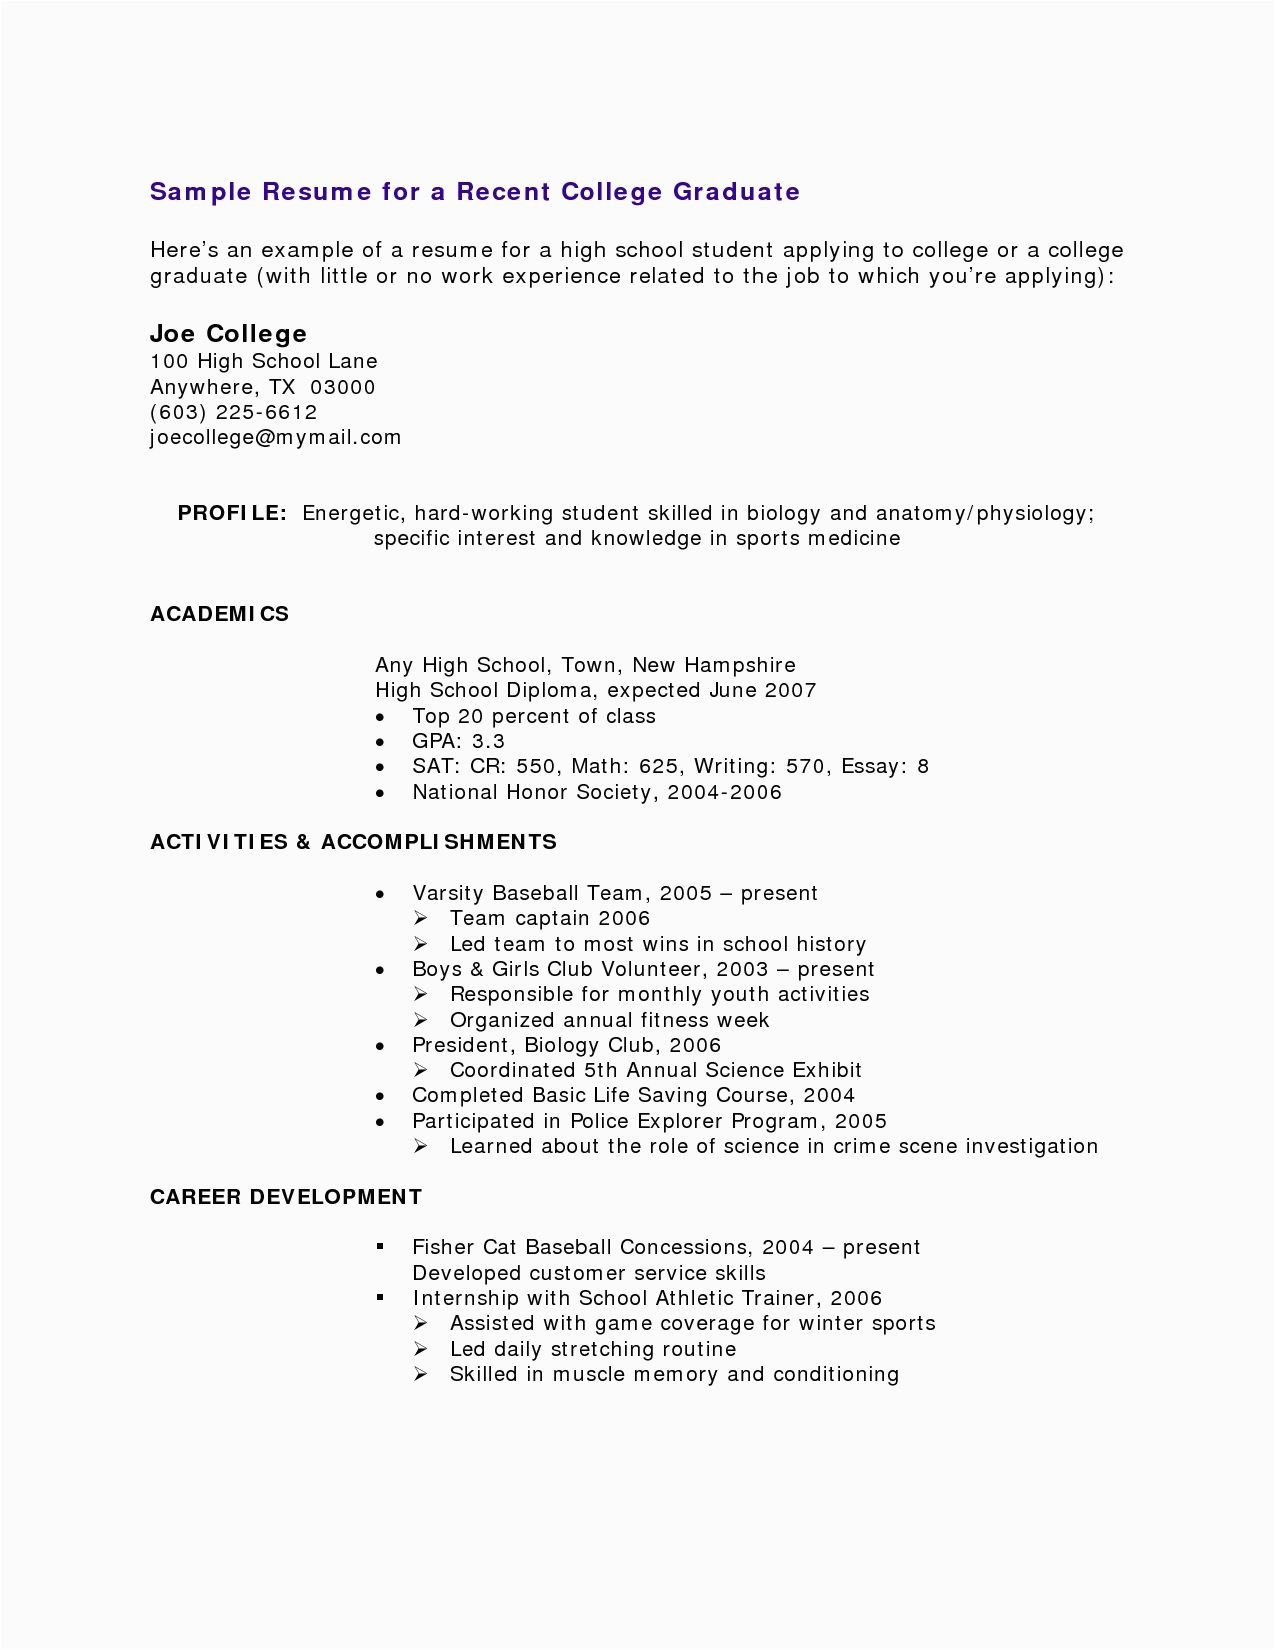 Sample Resume for High School Student with No Work History High School Student Resume with No Work Experience Resume